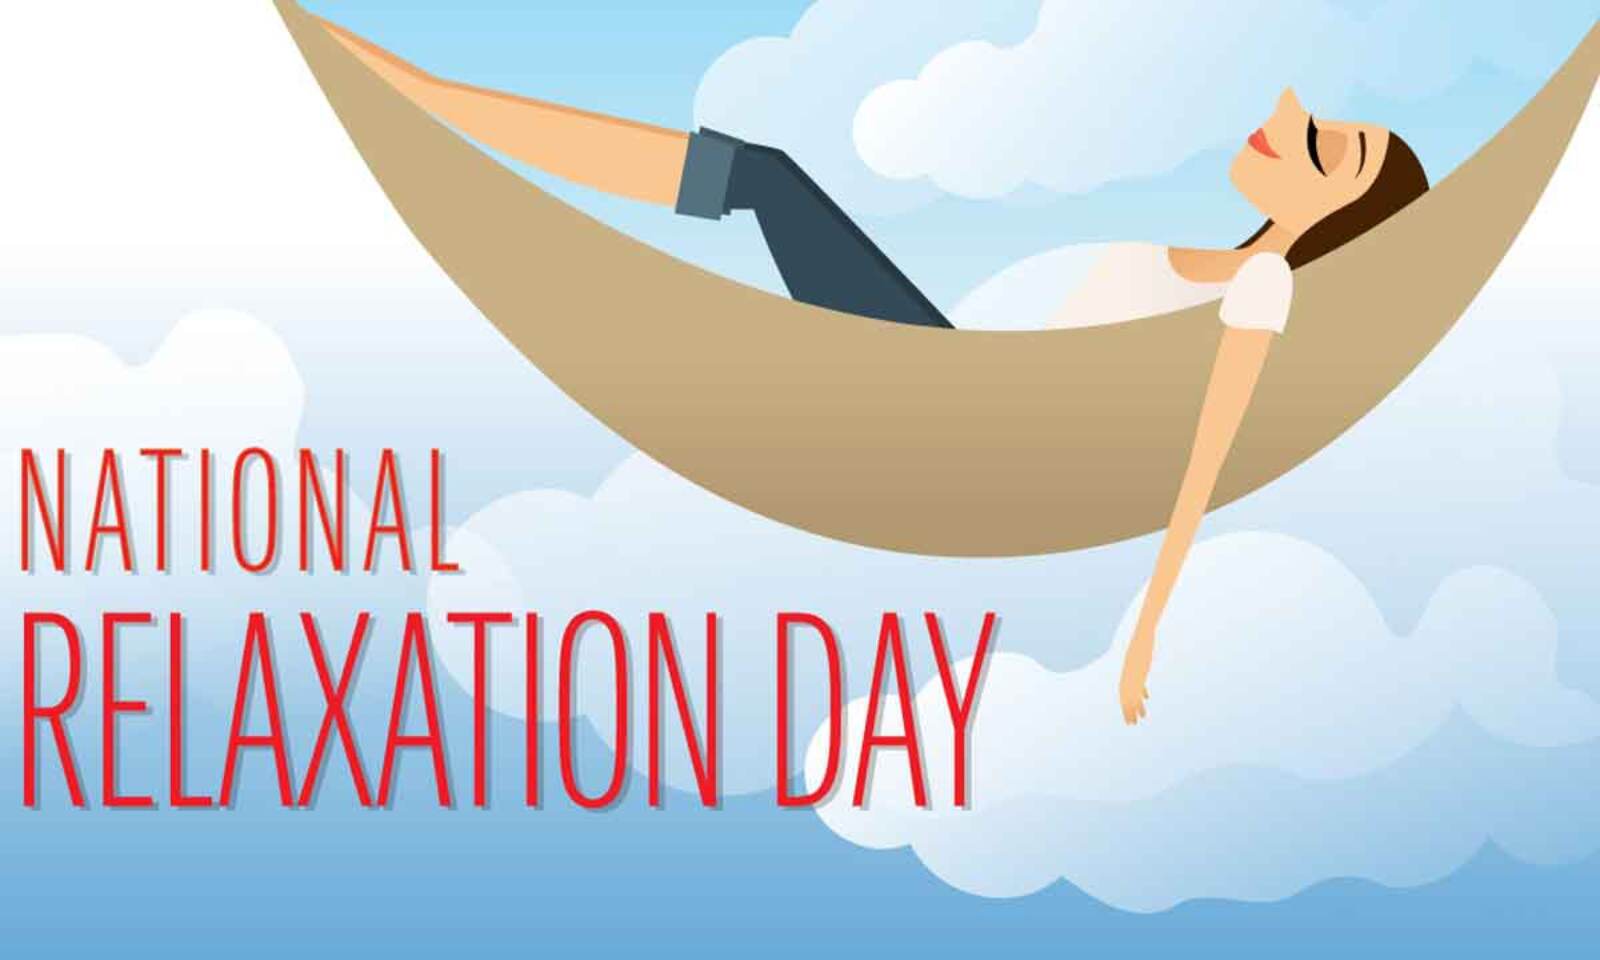 National Relaxation Day: Date, history, significance, ways to